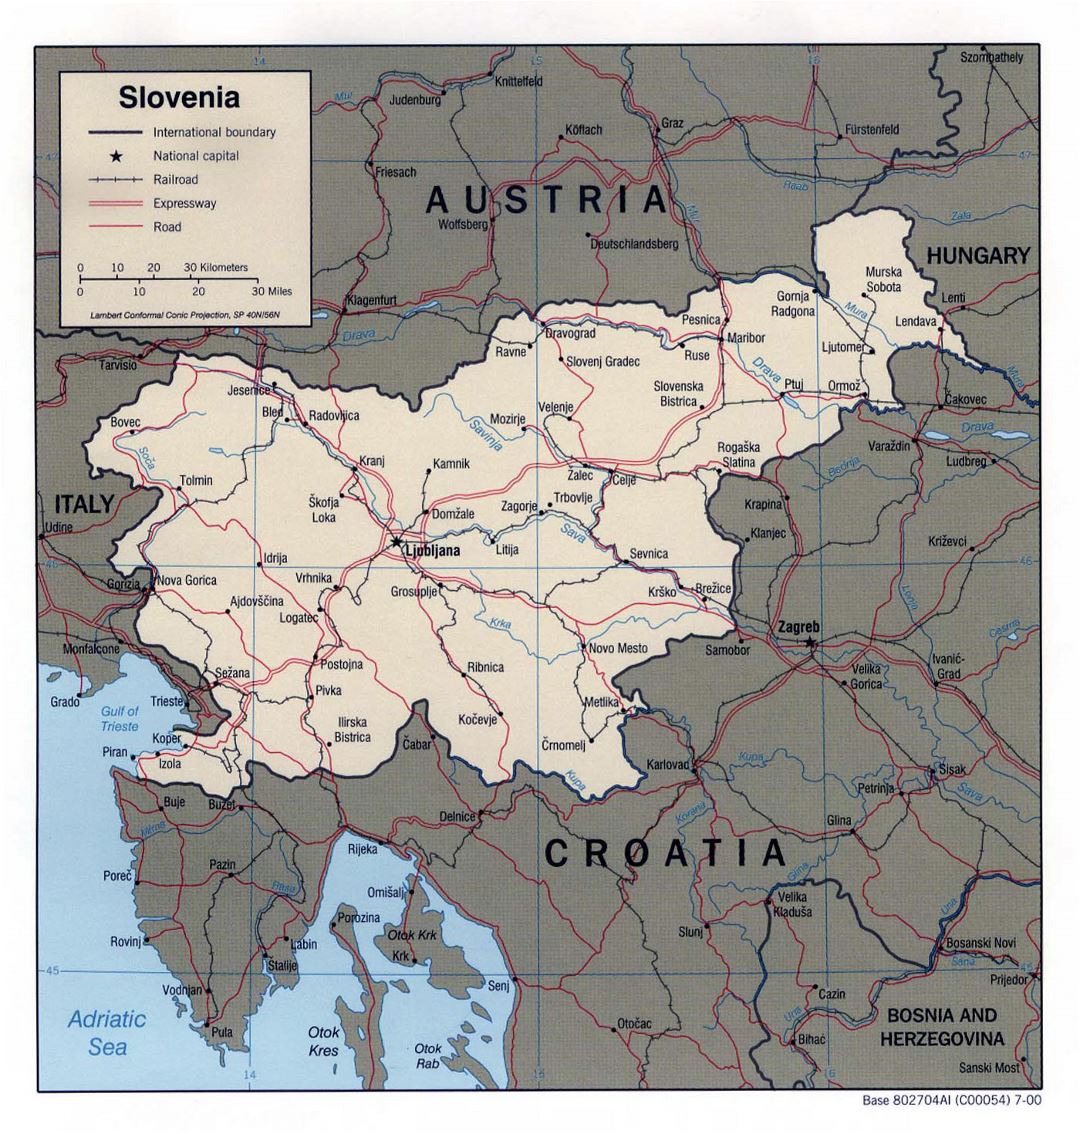 Large political map of Slovenia with roads, railroads and major cities - 2000